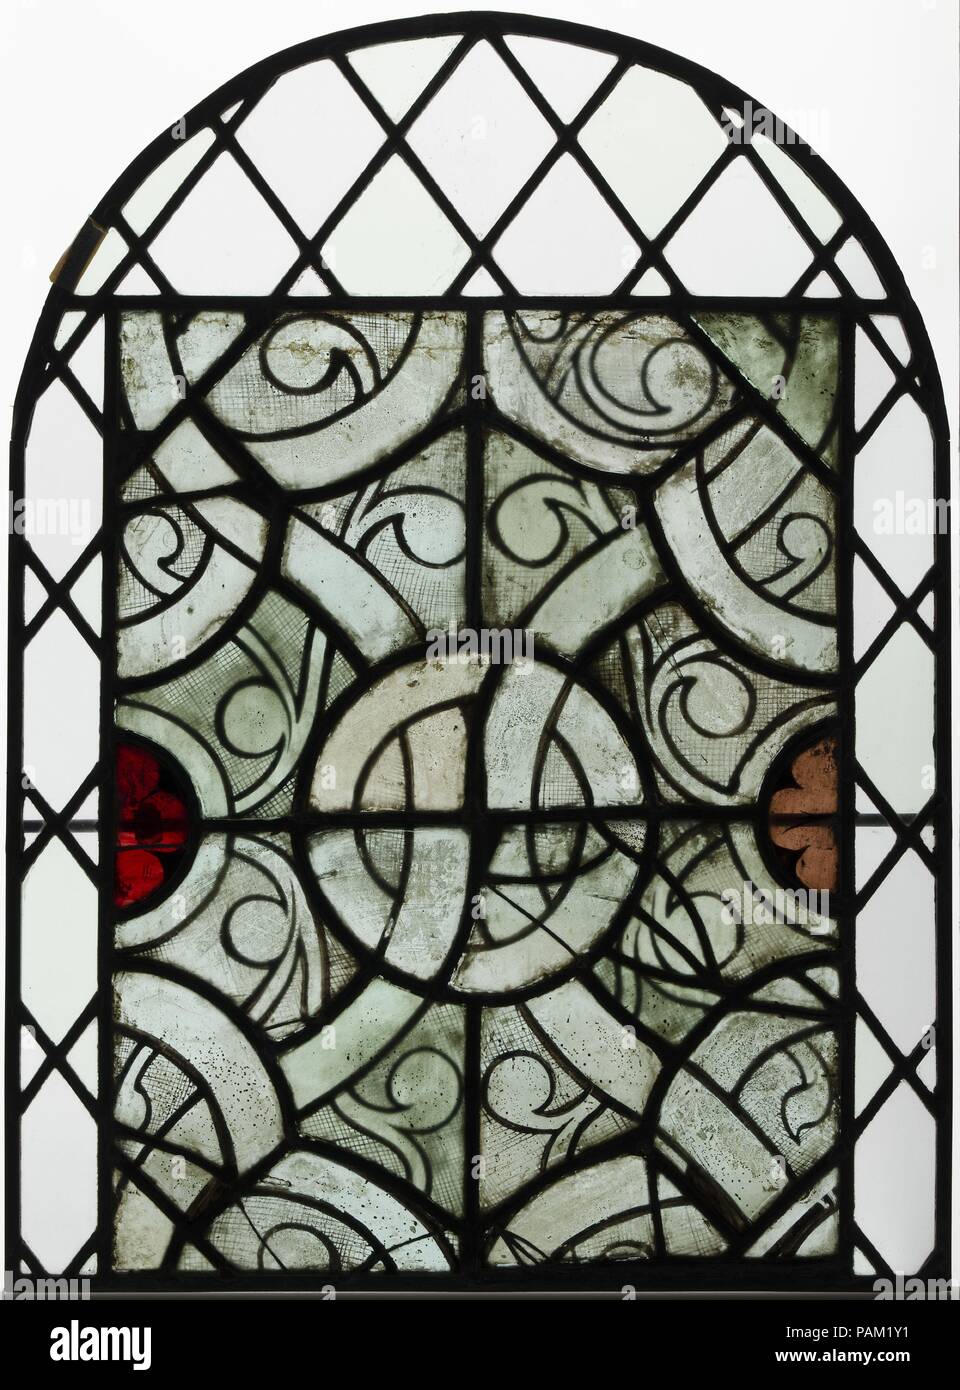 Glass panel. Culture: French. Dimensions: Overall: 22 7/8 x 17 3/8in. (58.1 x 44.1cm). Date: 1250-70. Museum: Metropolitan Museum of Art, New York, USA. Stock Photo